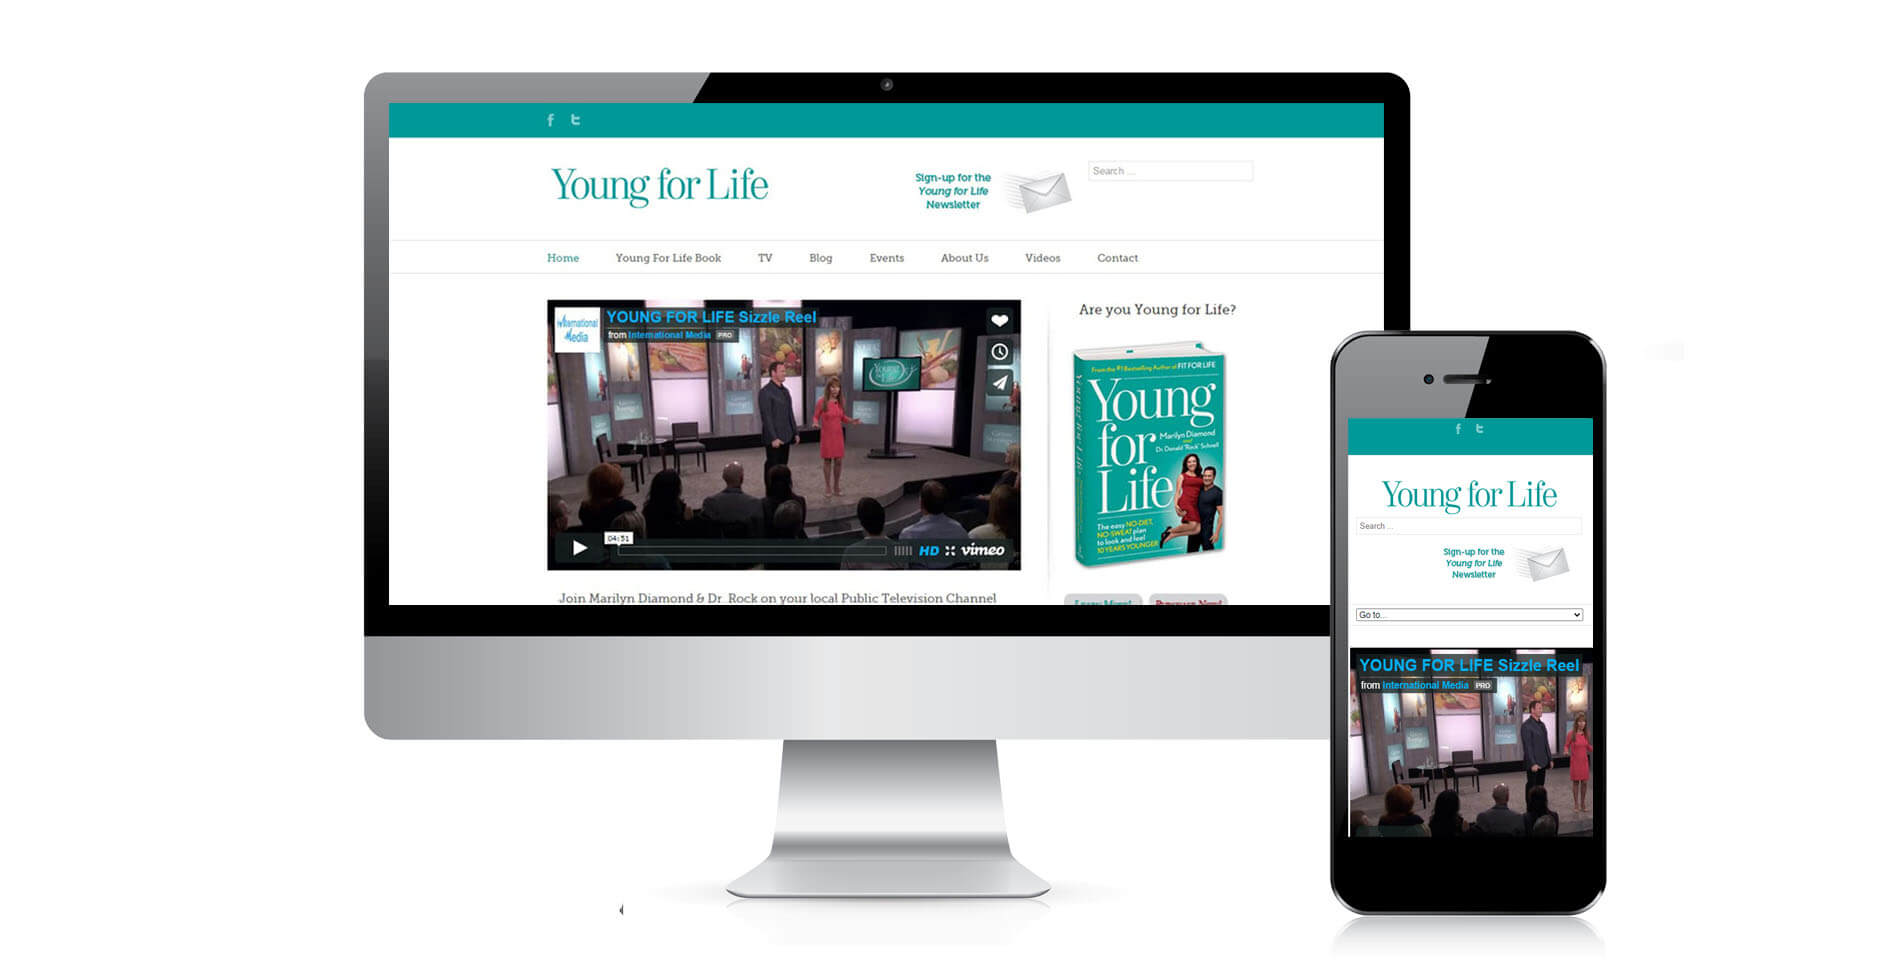 An image of the responsive design of Young for Life, website created by Not Fade Away Marketing